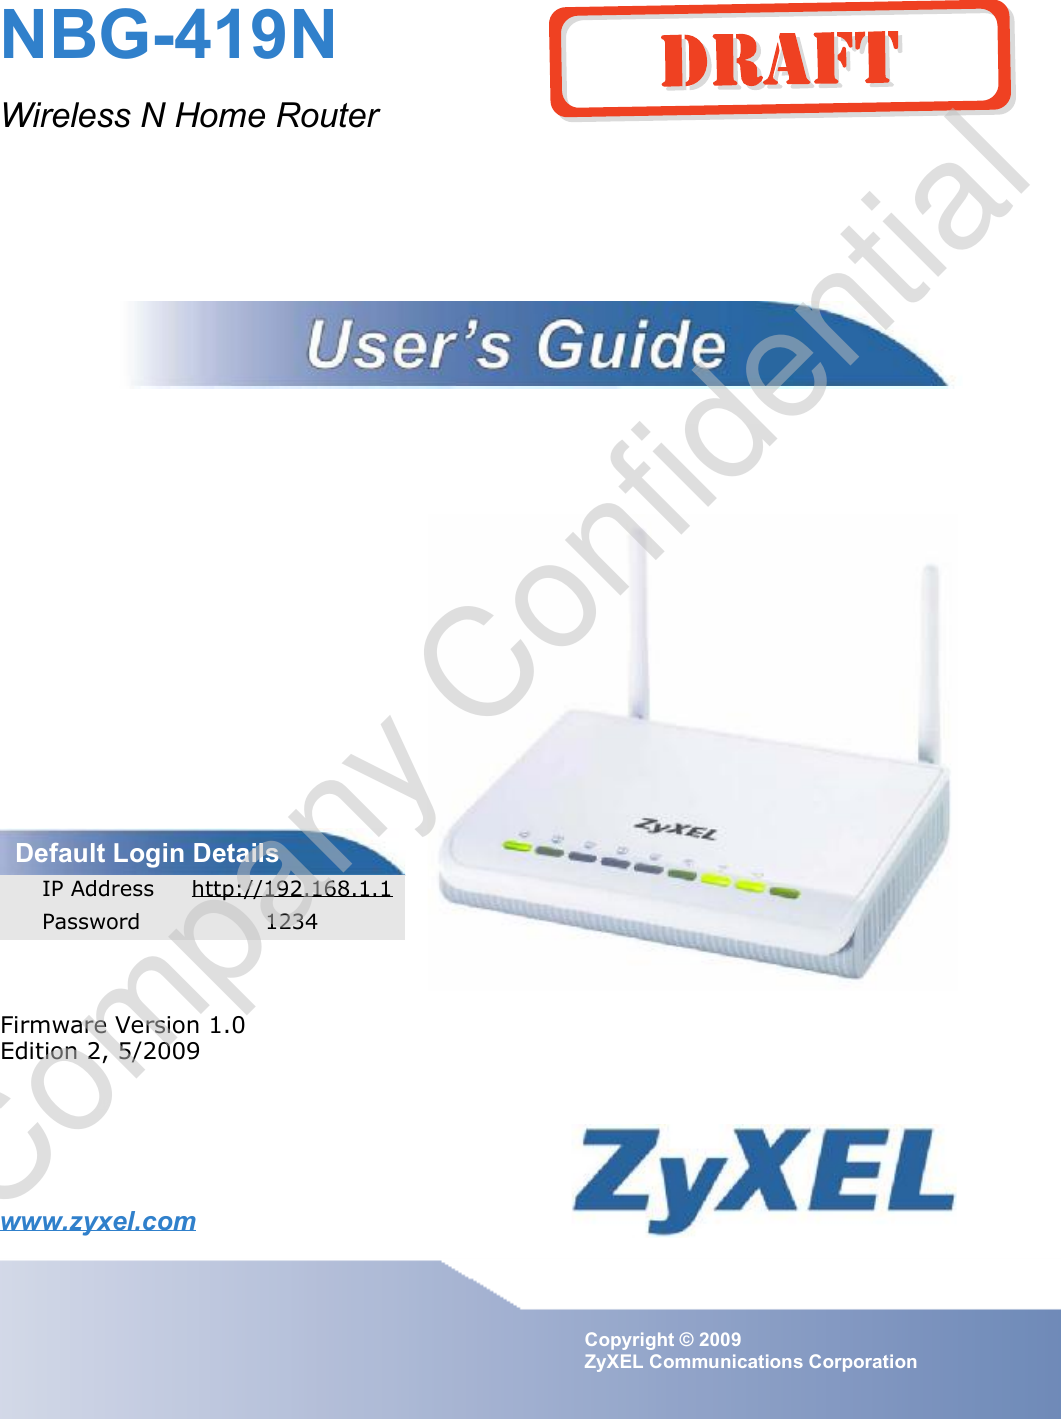 www.zyxel.comwww.zyxel.comNBG-419NWireless N Home RouterCopyright © 2009ZyXEL Communications CorporationFirmware Version 1.0Edition 2, 5/2009Default Login DetailsIP Address http://192.168.1.1Password 1234Company Confidential